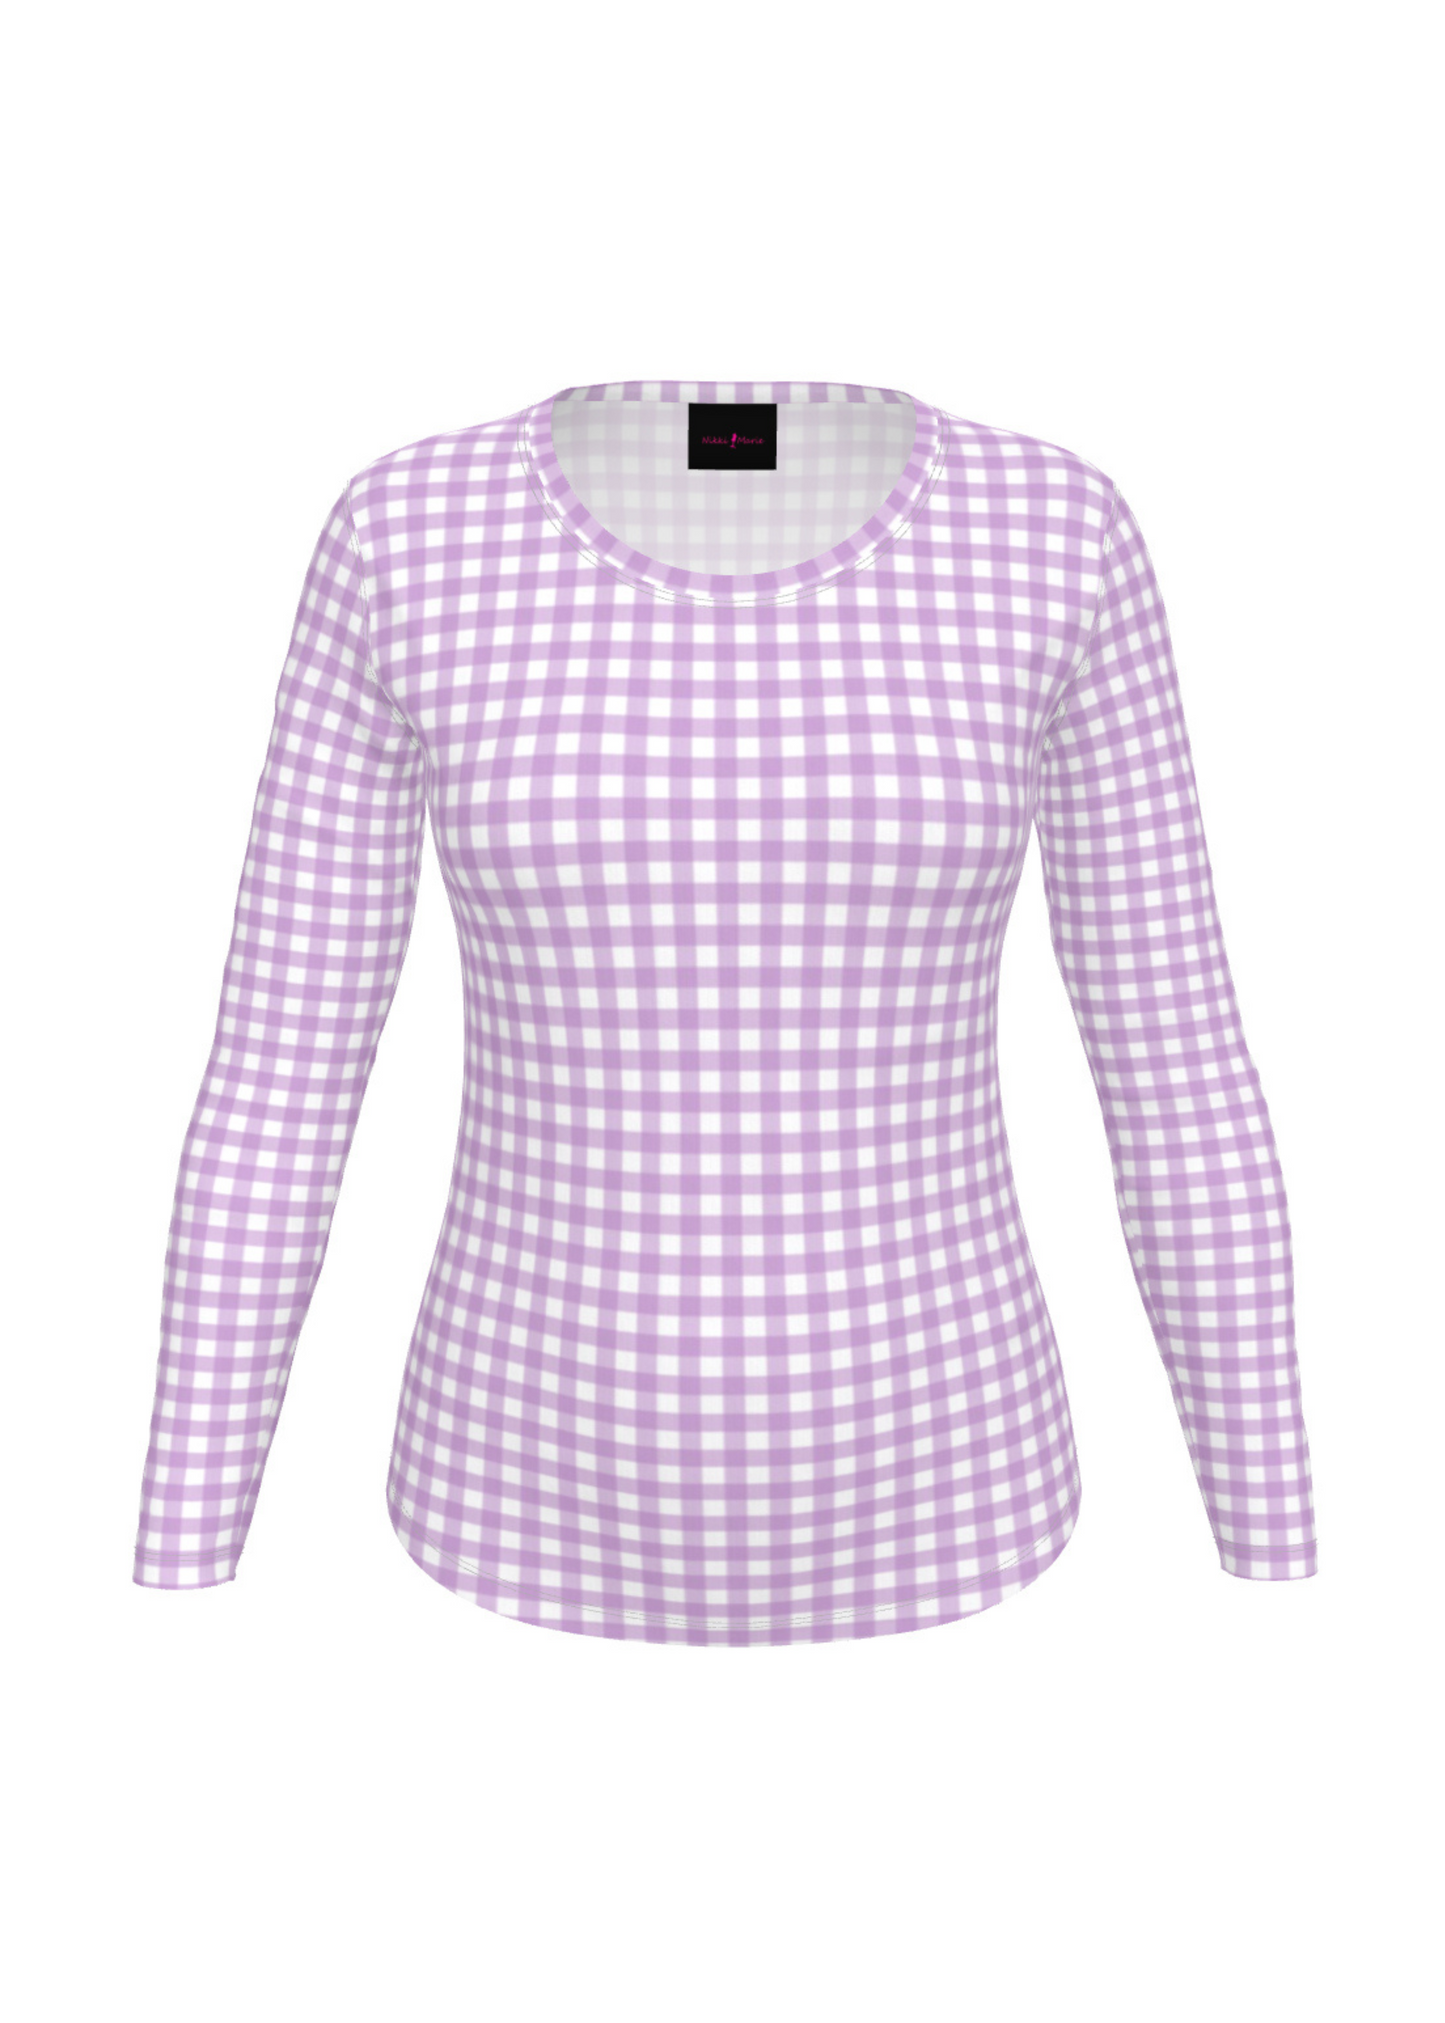 Mad Gingham Tee - Long Sleeve In Lavender